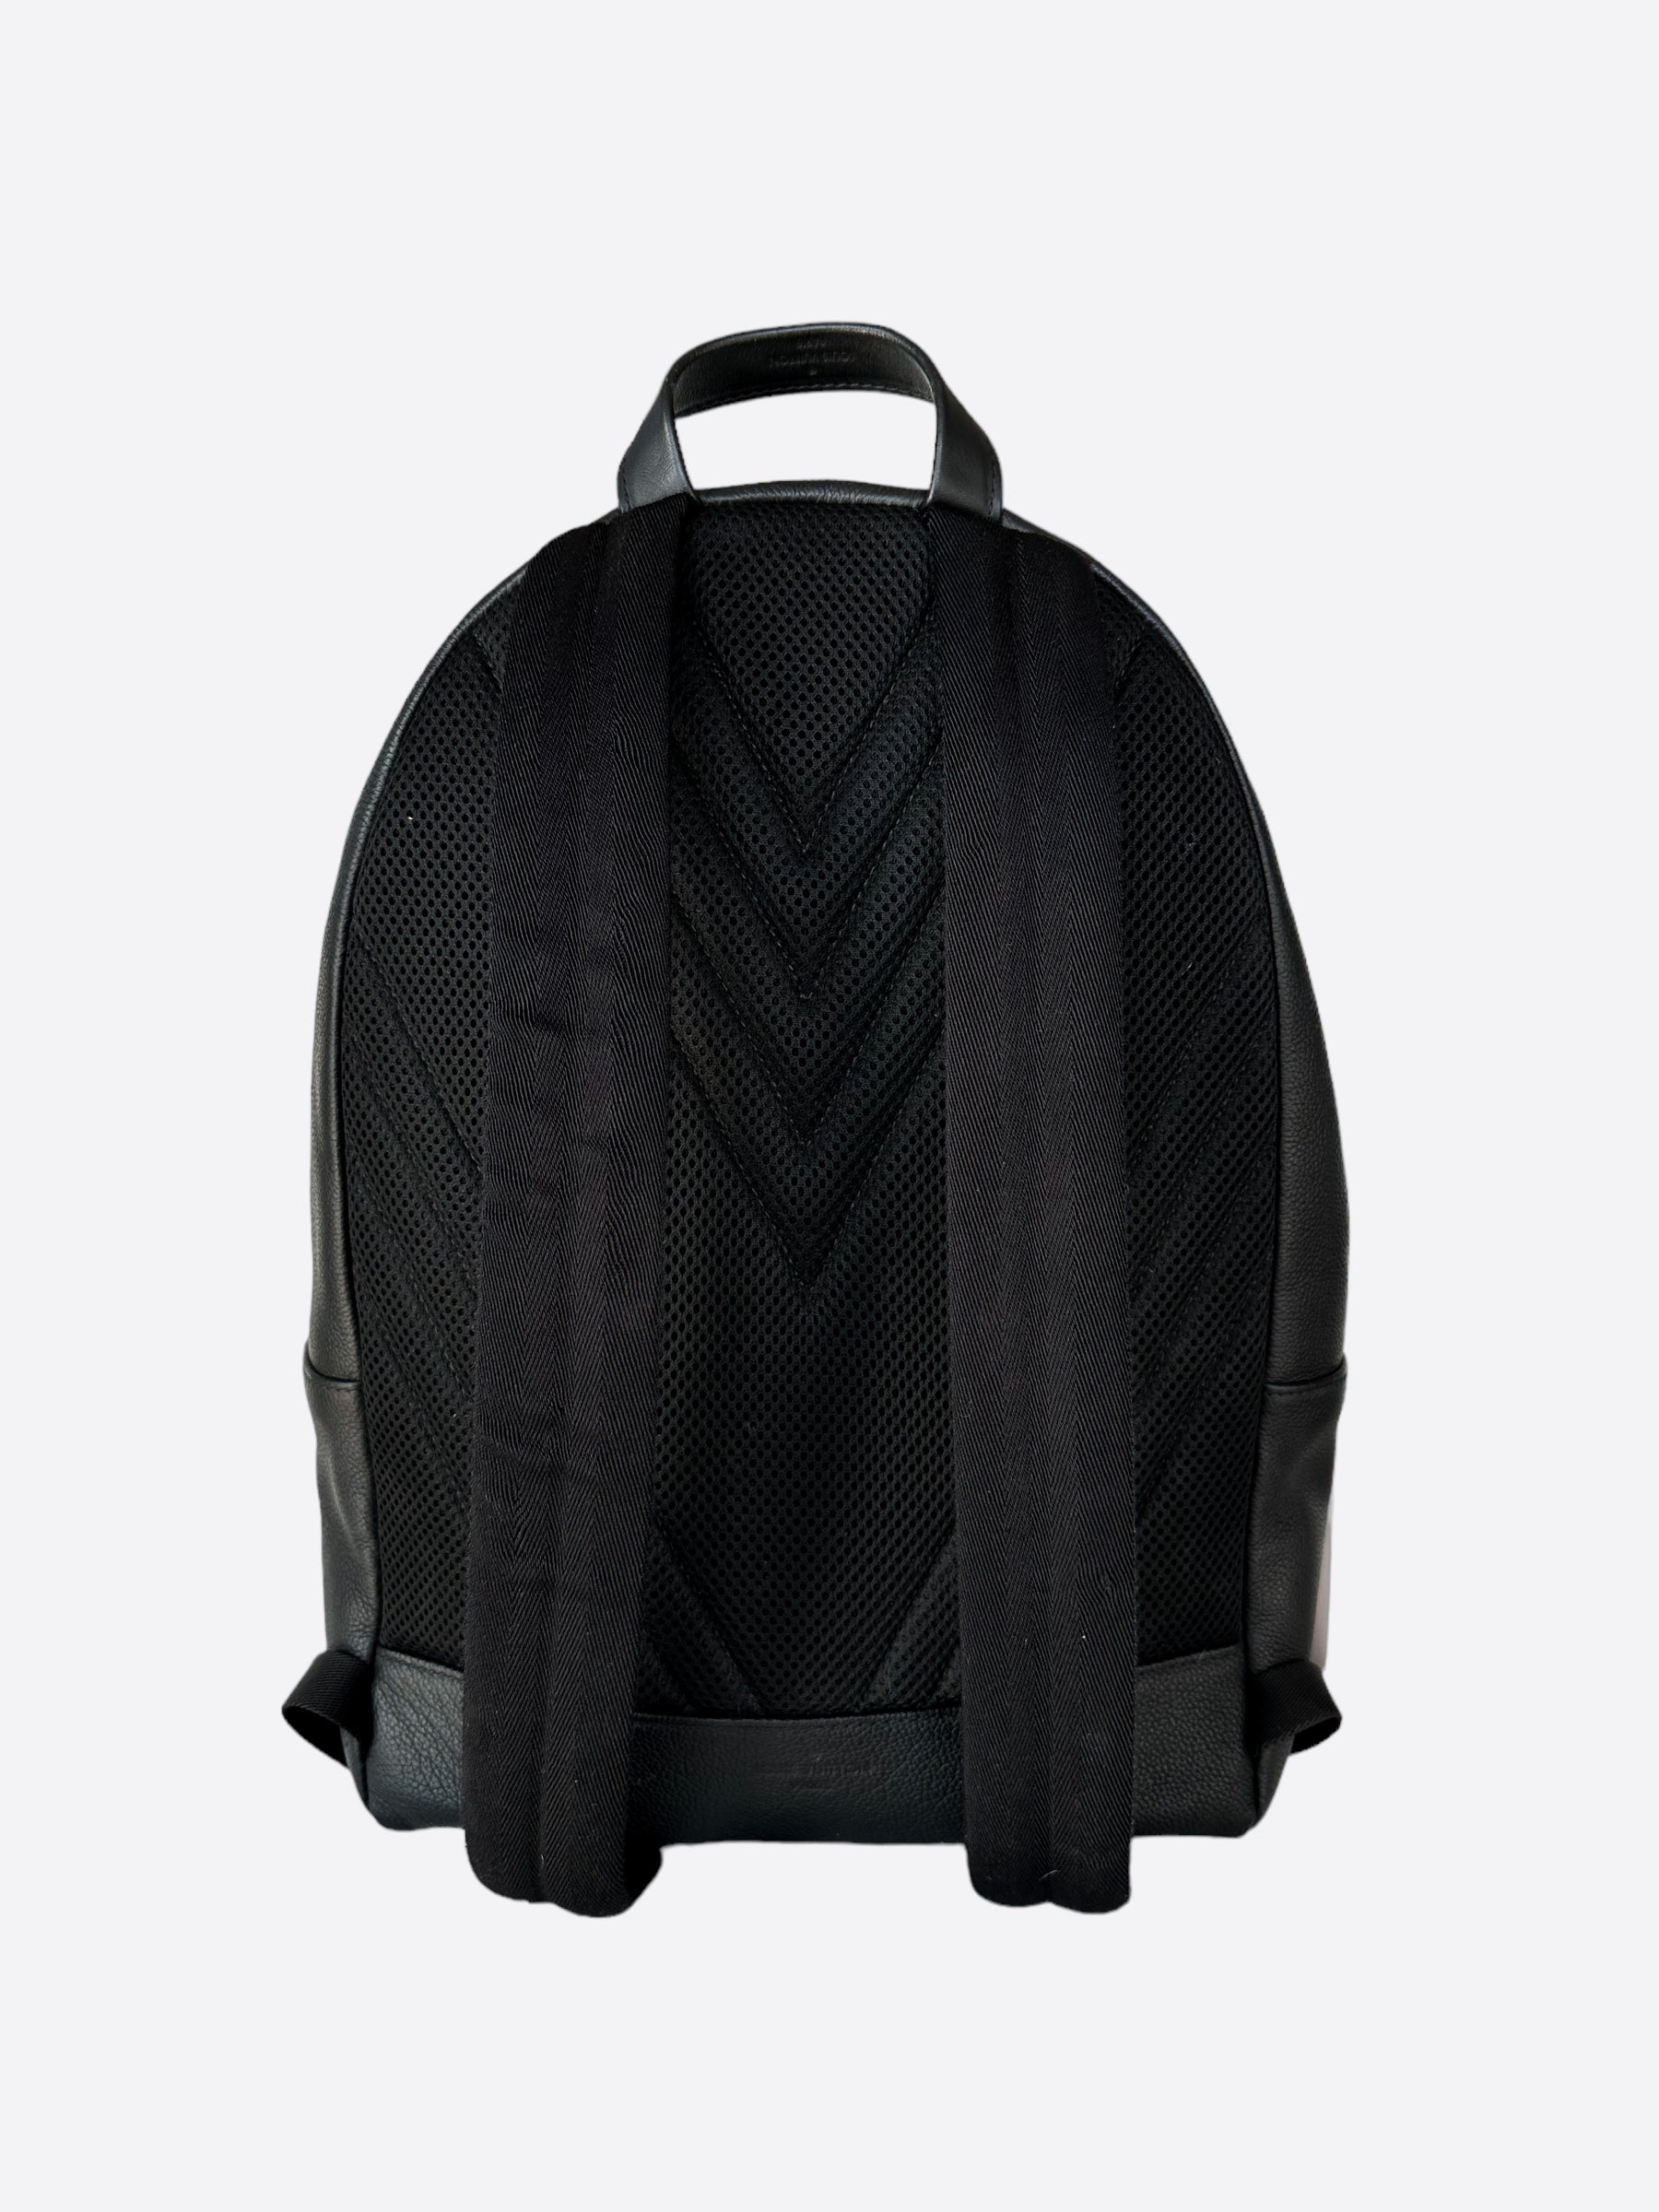 Louis Vuitton Takeoff Backpack Black autres Cuirs